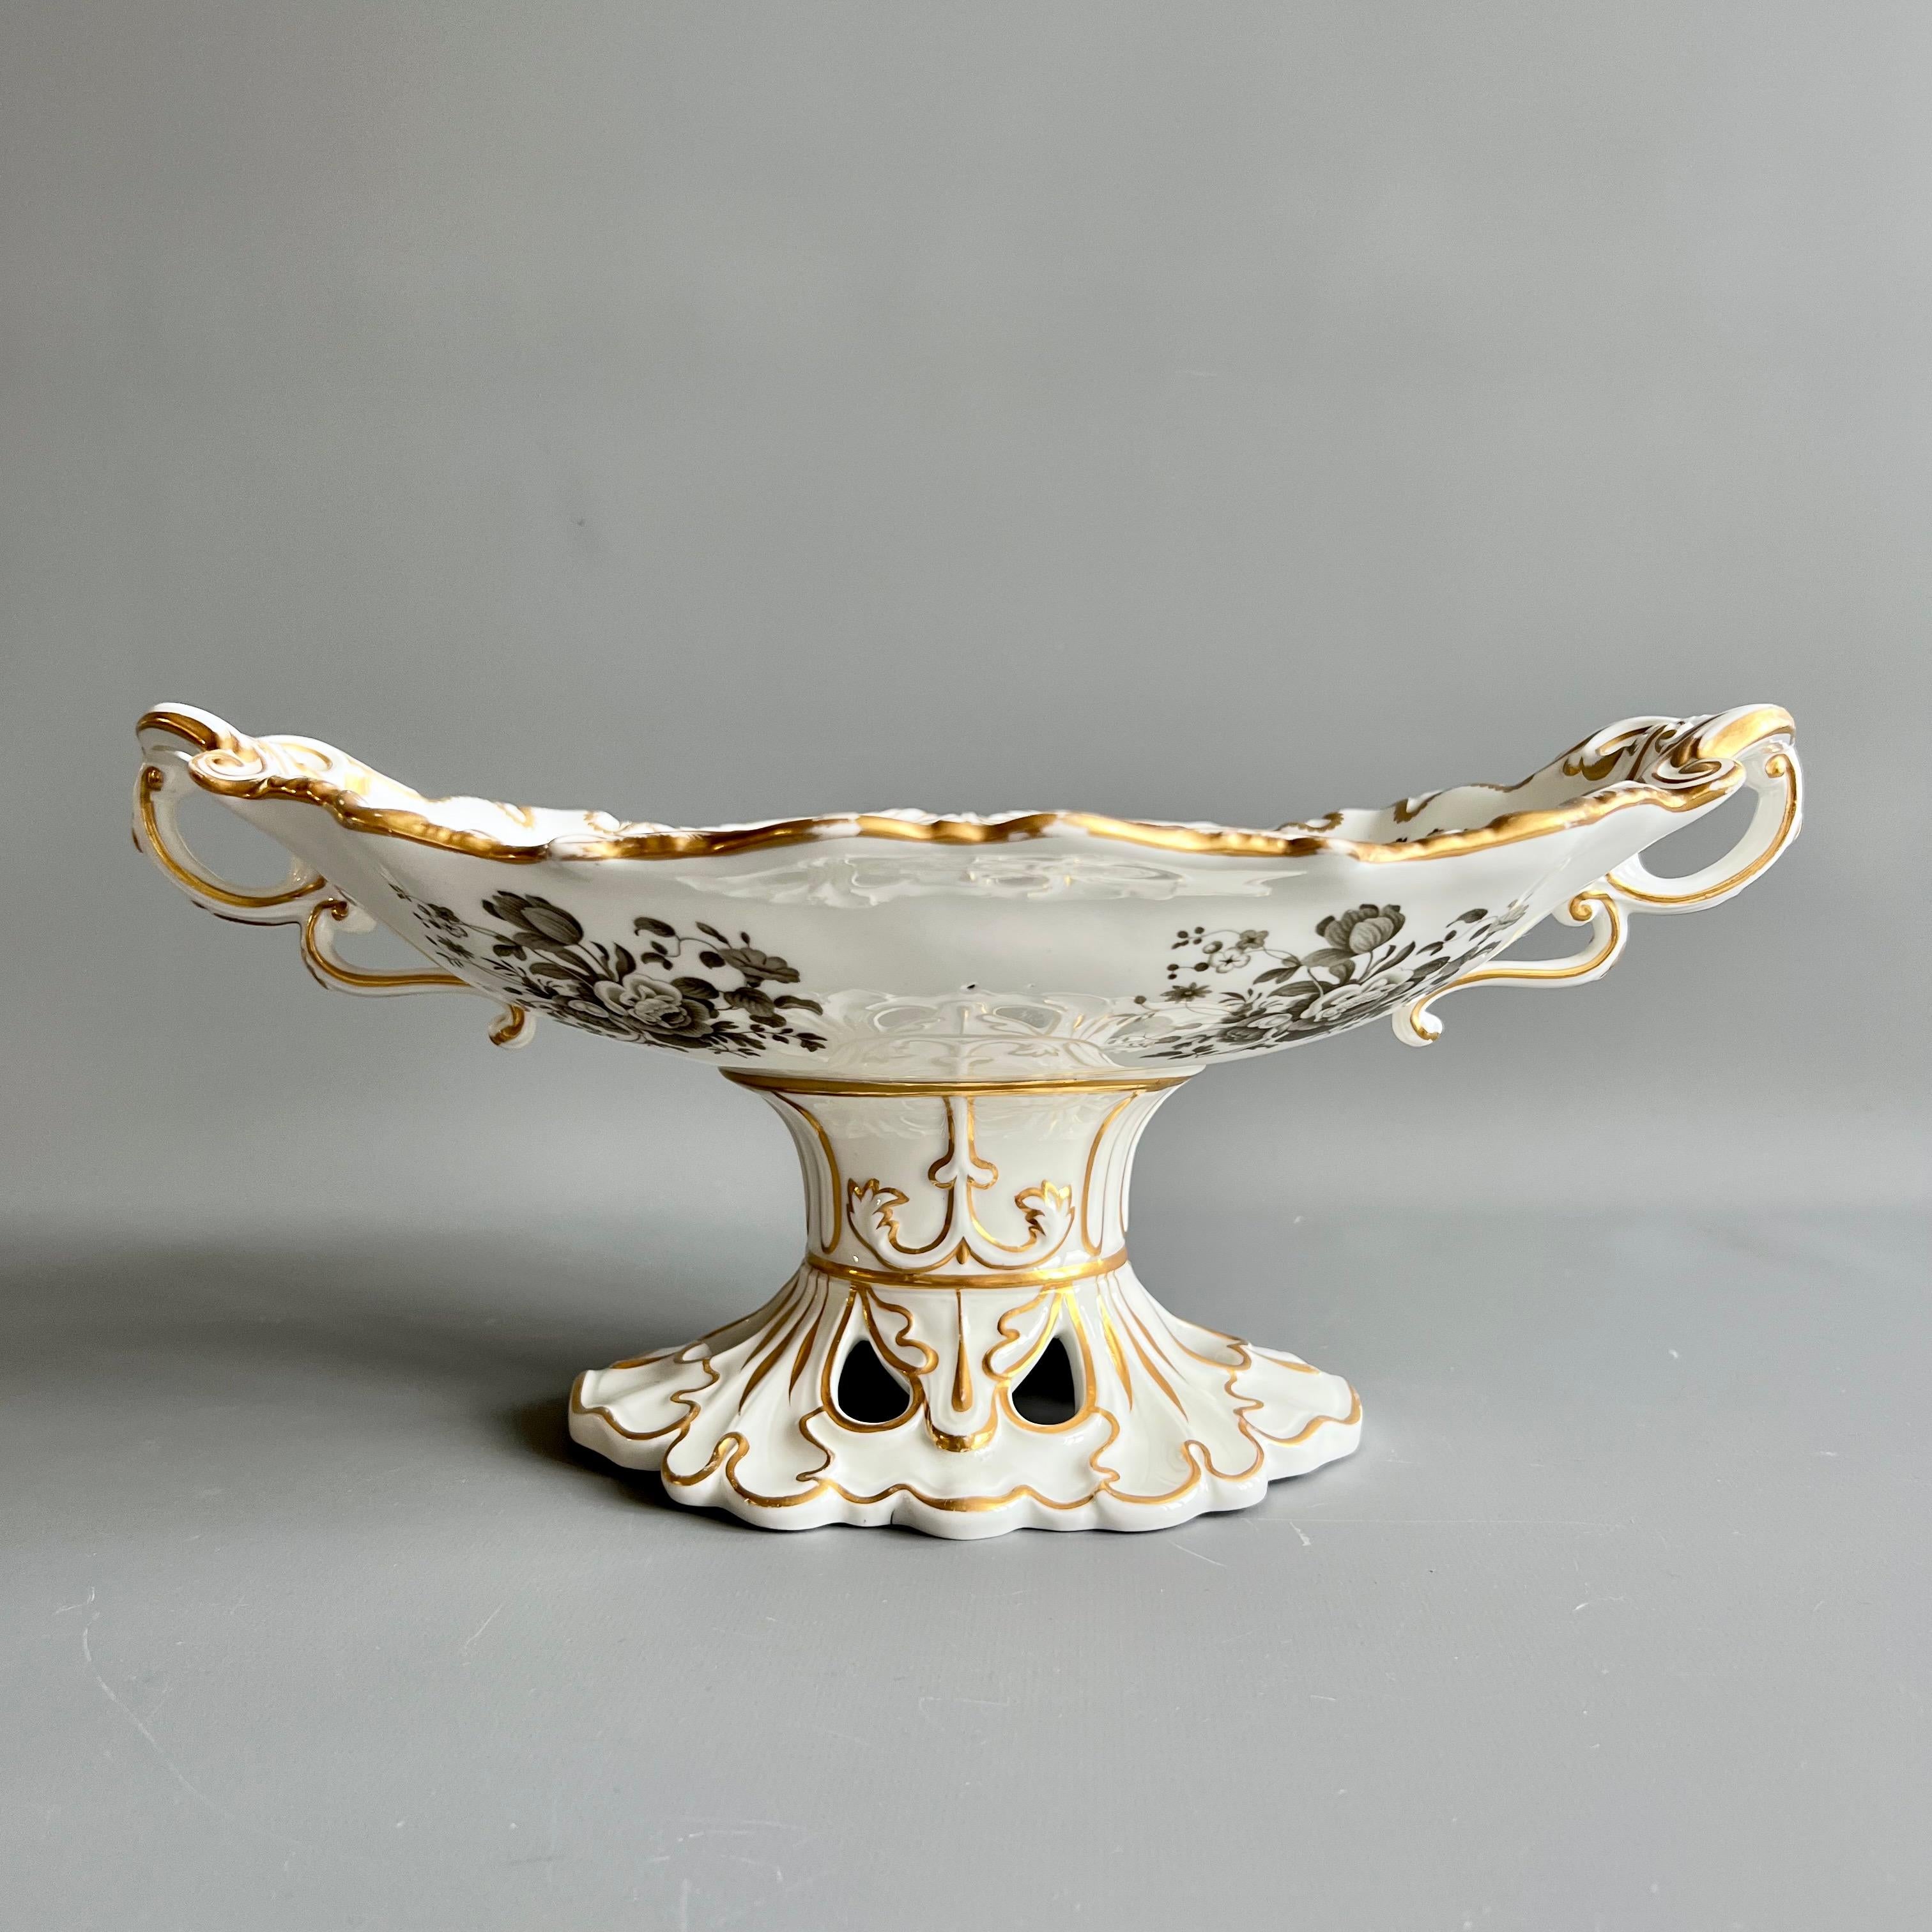 Rococo Revival Minton Dessert Service, Inverted Shell White with Monochrome Flowers, ca 1830 For Sale